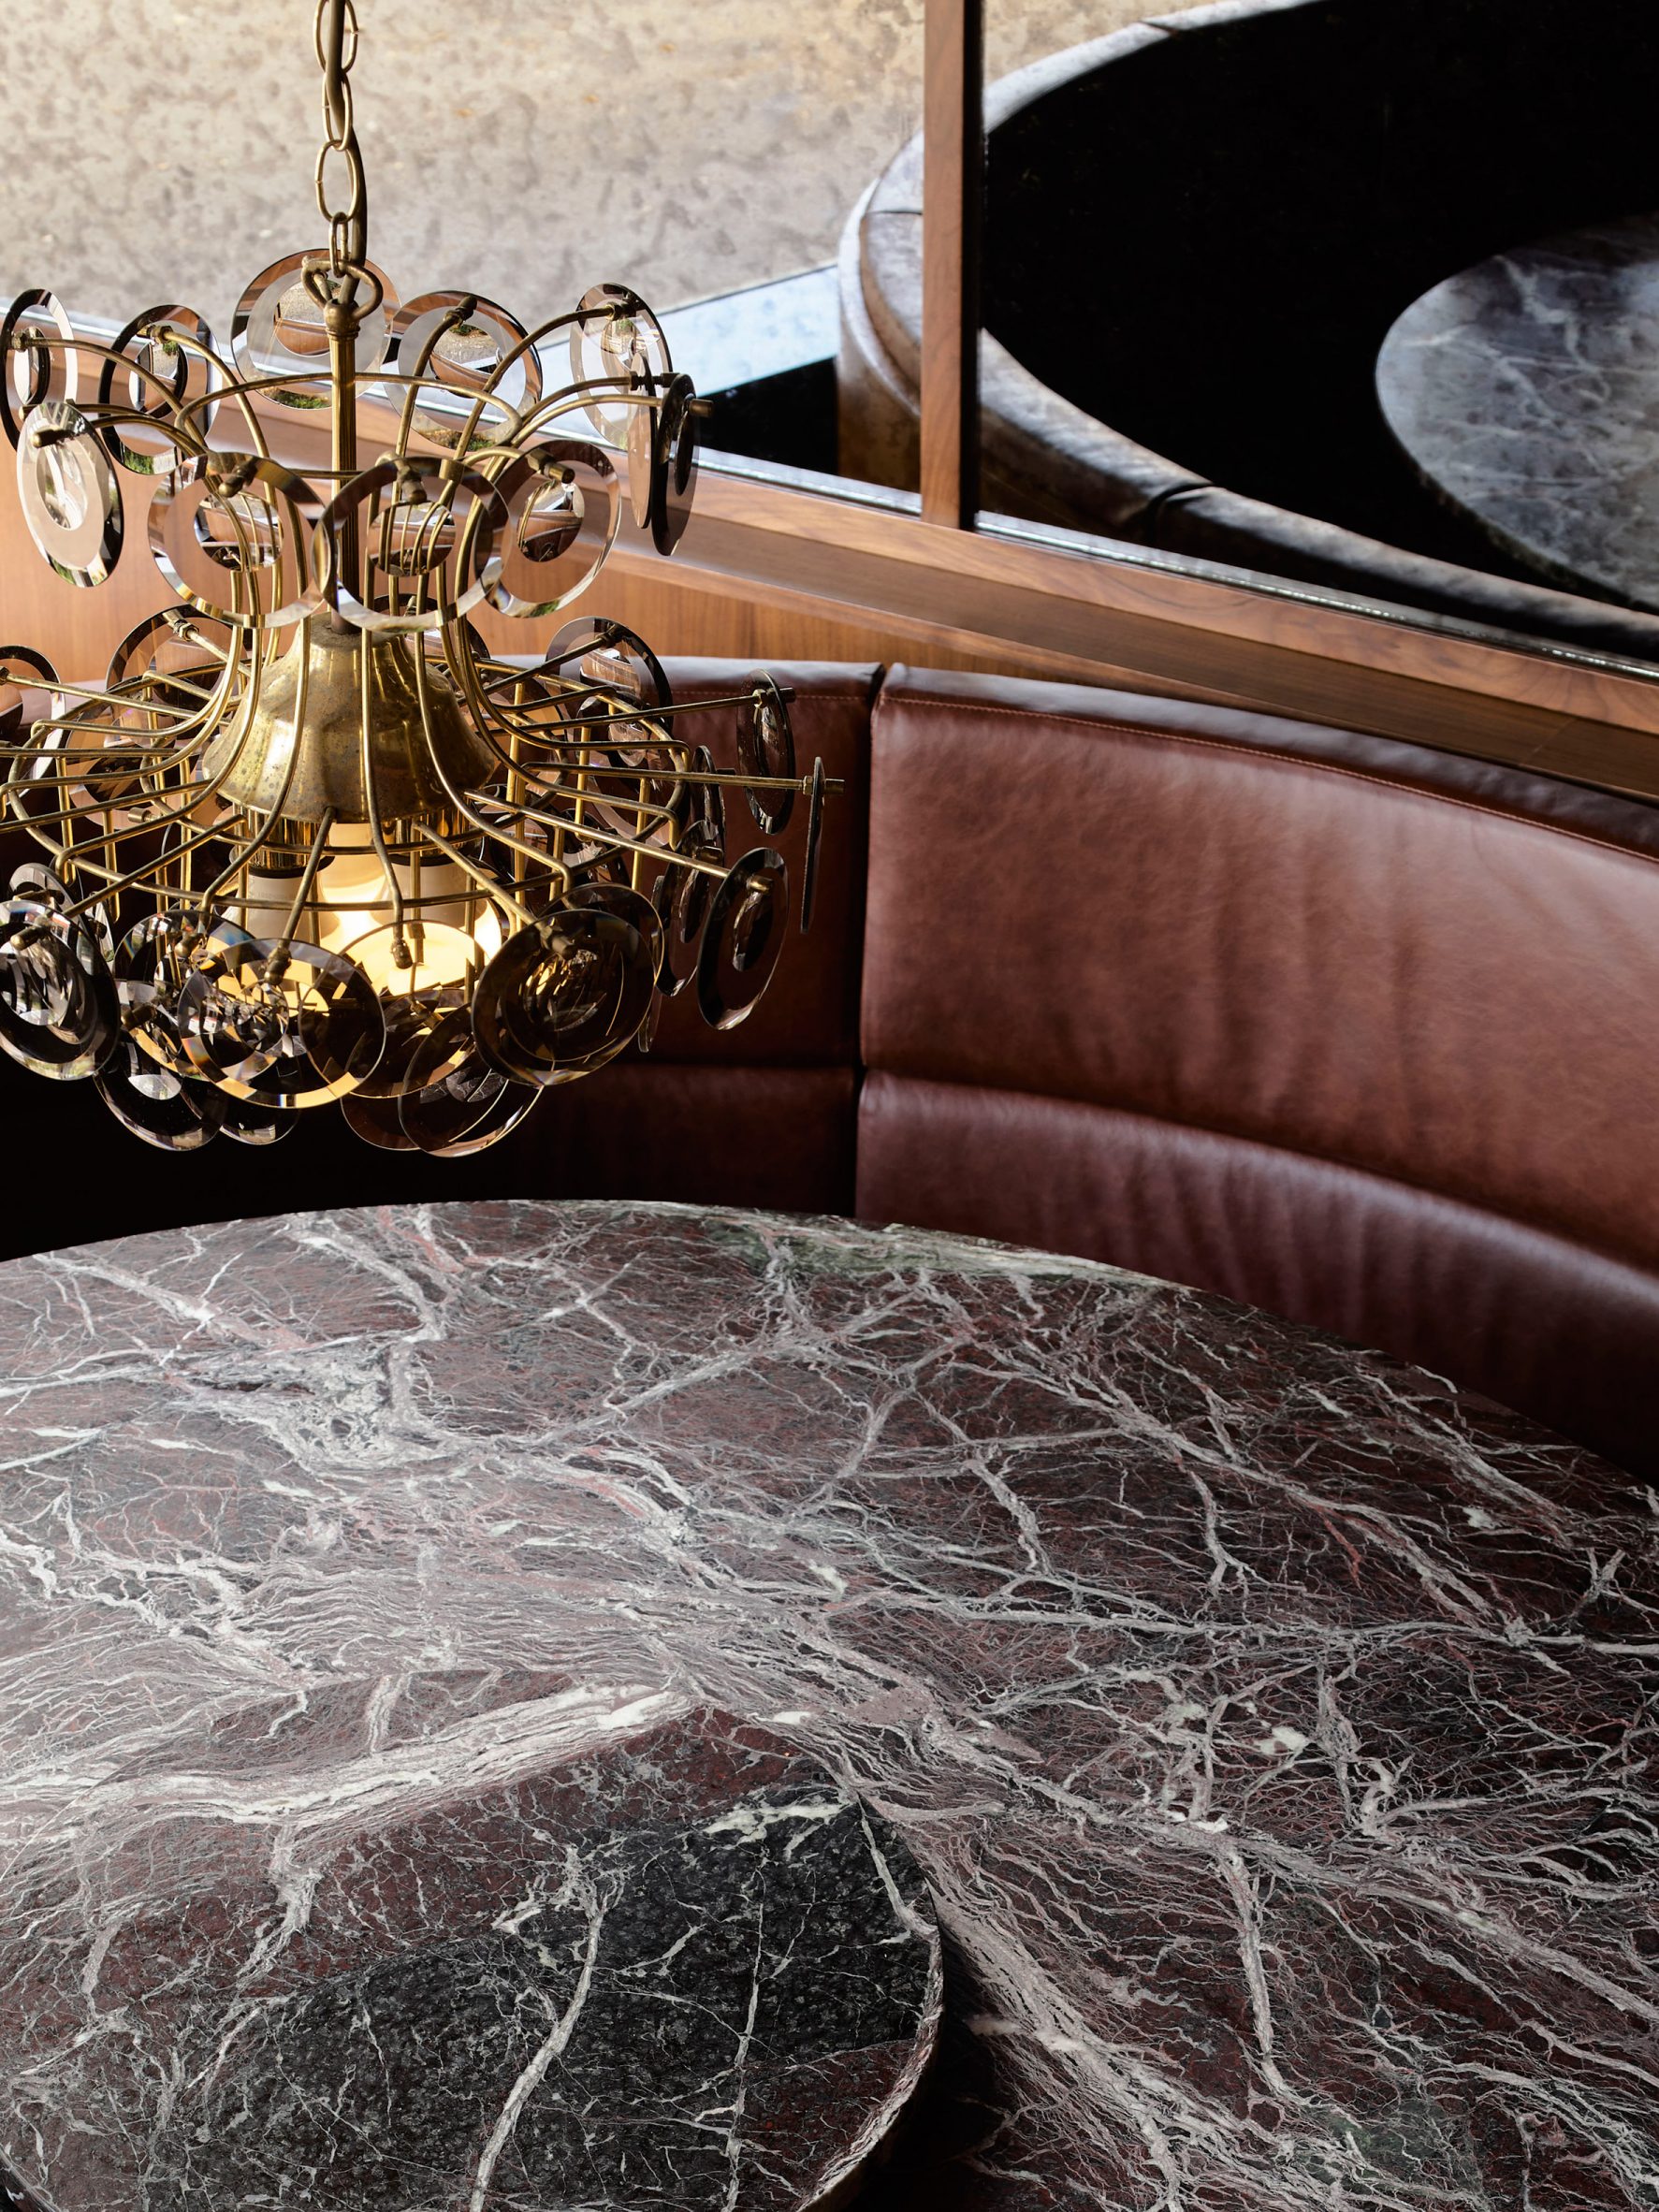 Marble table top and ornate chandelier inside.  Jane bar